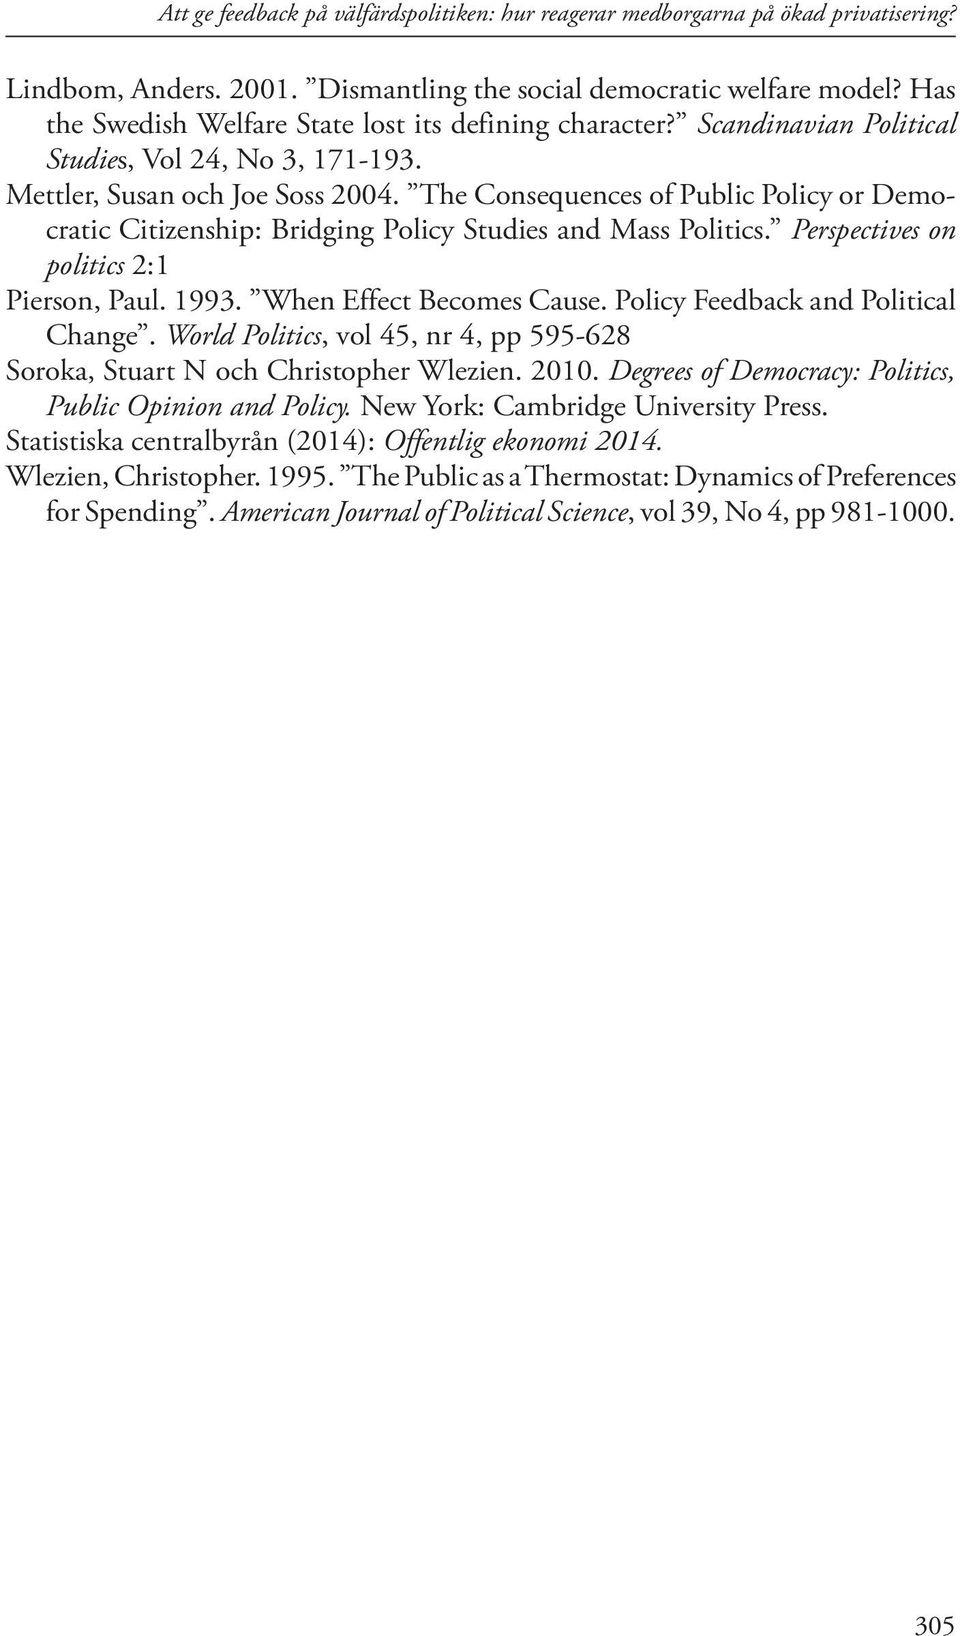 The Consequences of Public Policy or Democratic Citizenship: Bridging Policy Studies and Mass Politics. Perspectives on politics 2:1 Pierson, Paul. 1993. When Effect Becomes Cause.